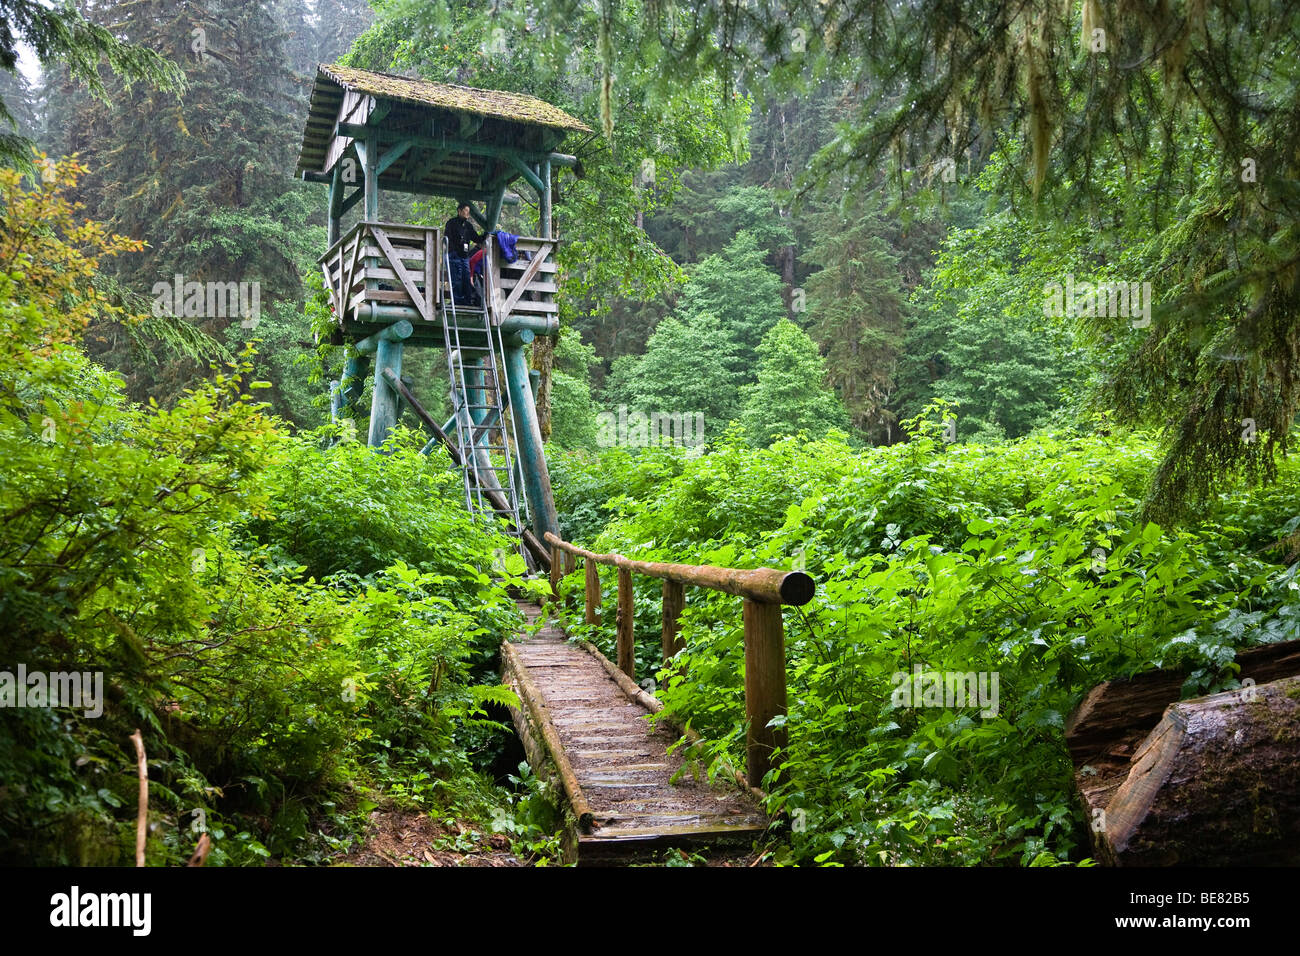 A man on a perch in the forest, Pack Creek, Tongass National Forest, Admiralty Island National Monument, Admiralty Island, Alask Stock Photo